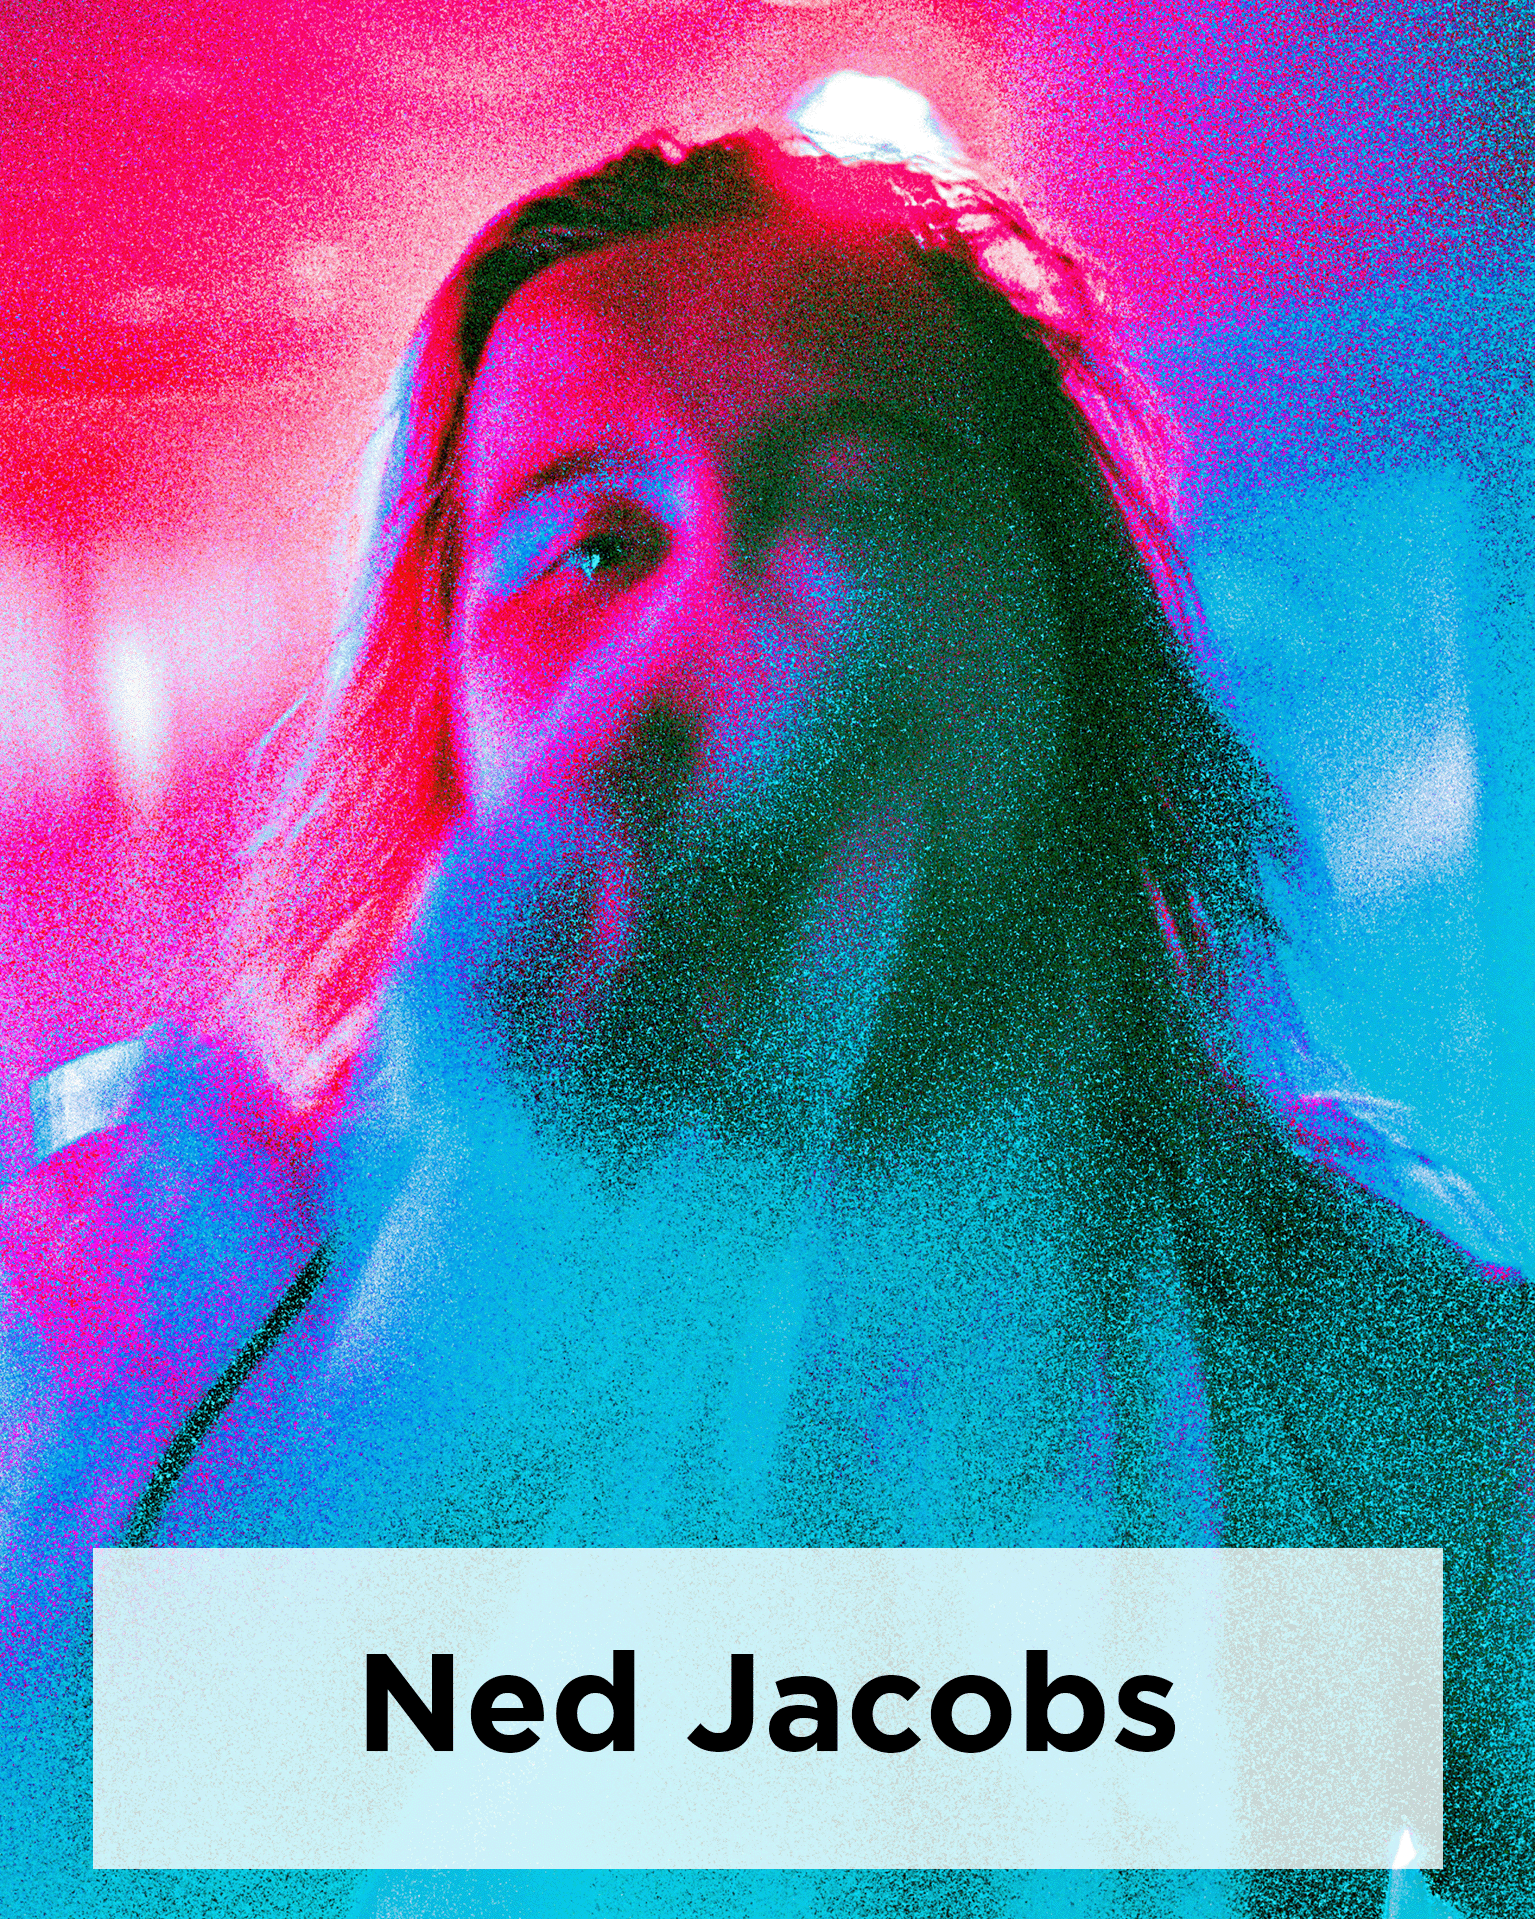 Ned Jacobs